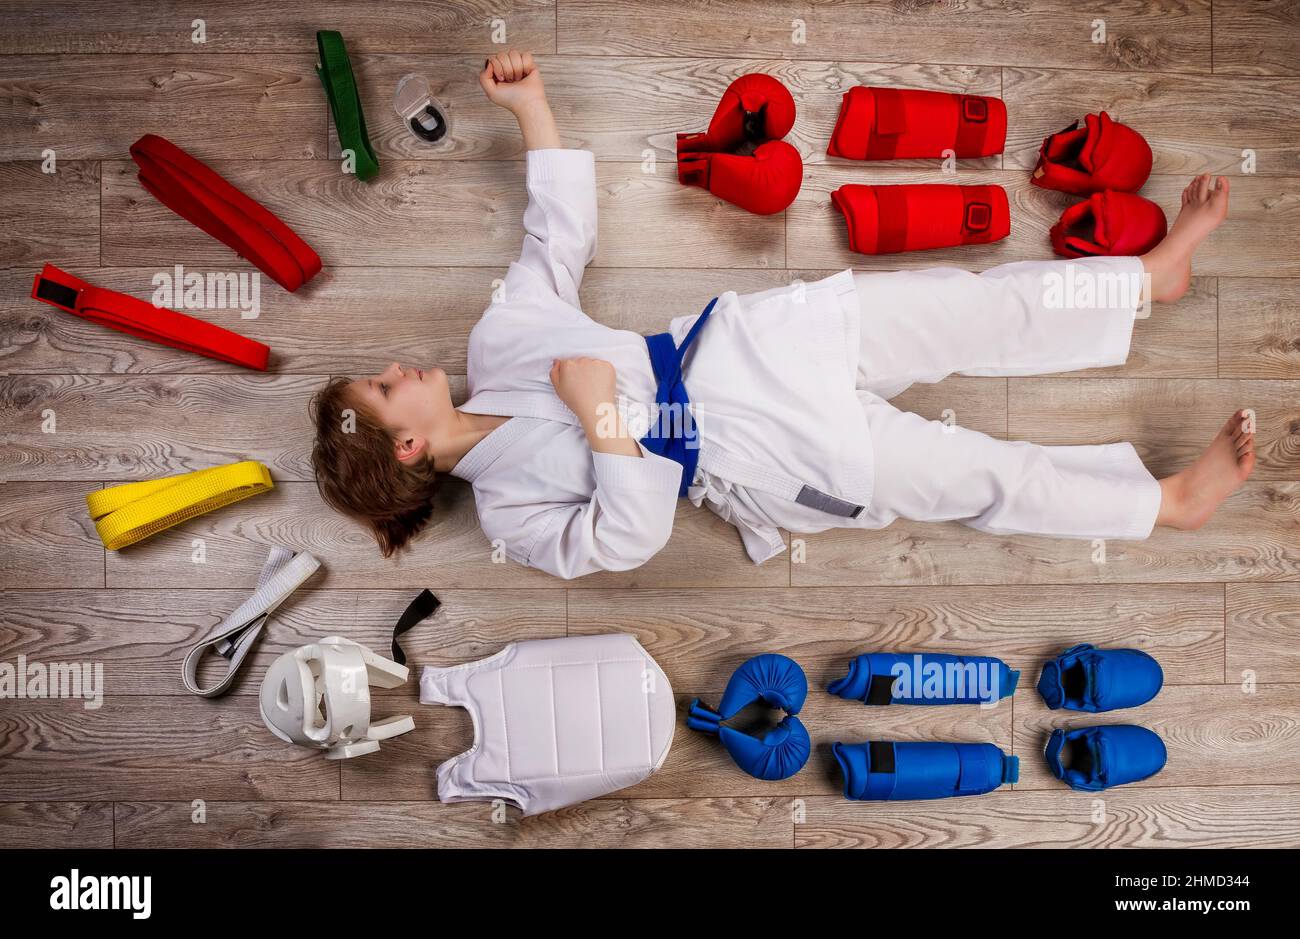 Conceptual image in flat lay style of a little karateka girl surrounded by her equipment necessary for training and competition Stock Photo